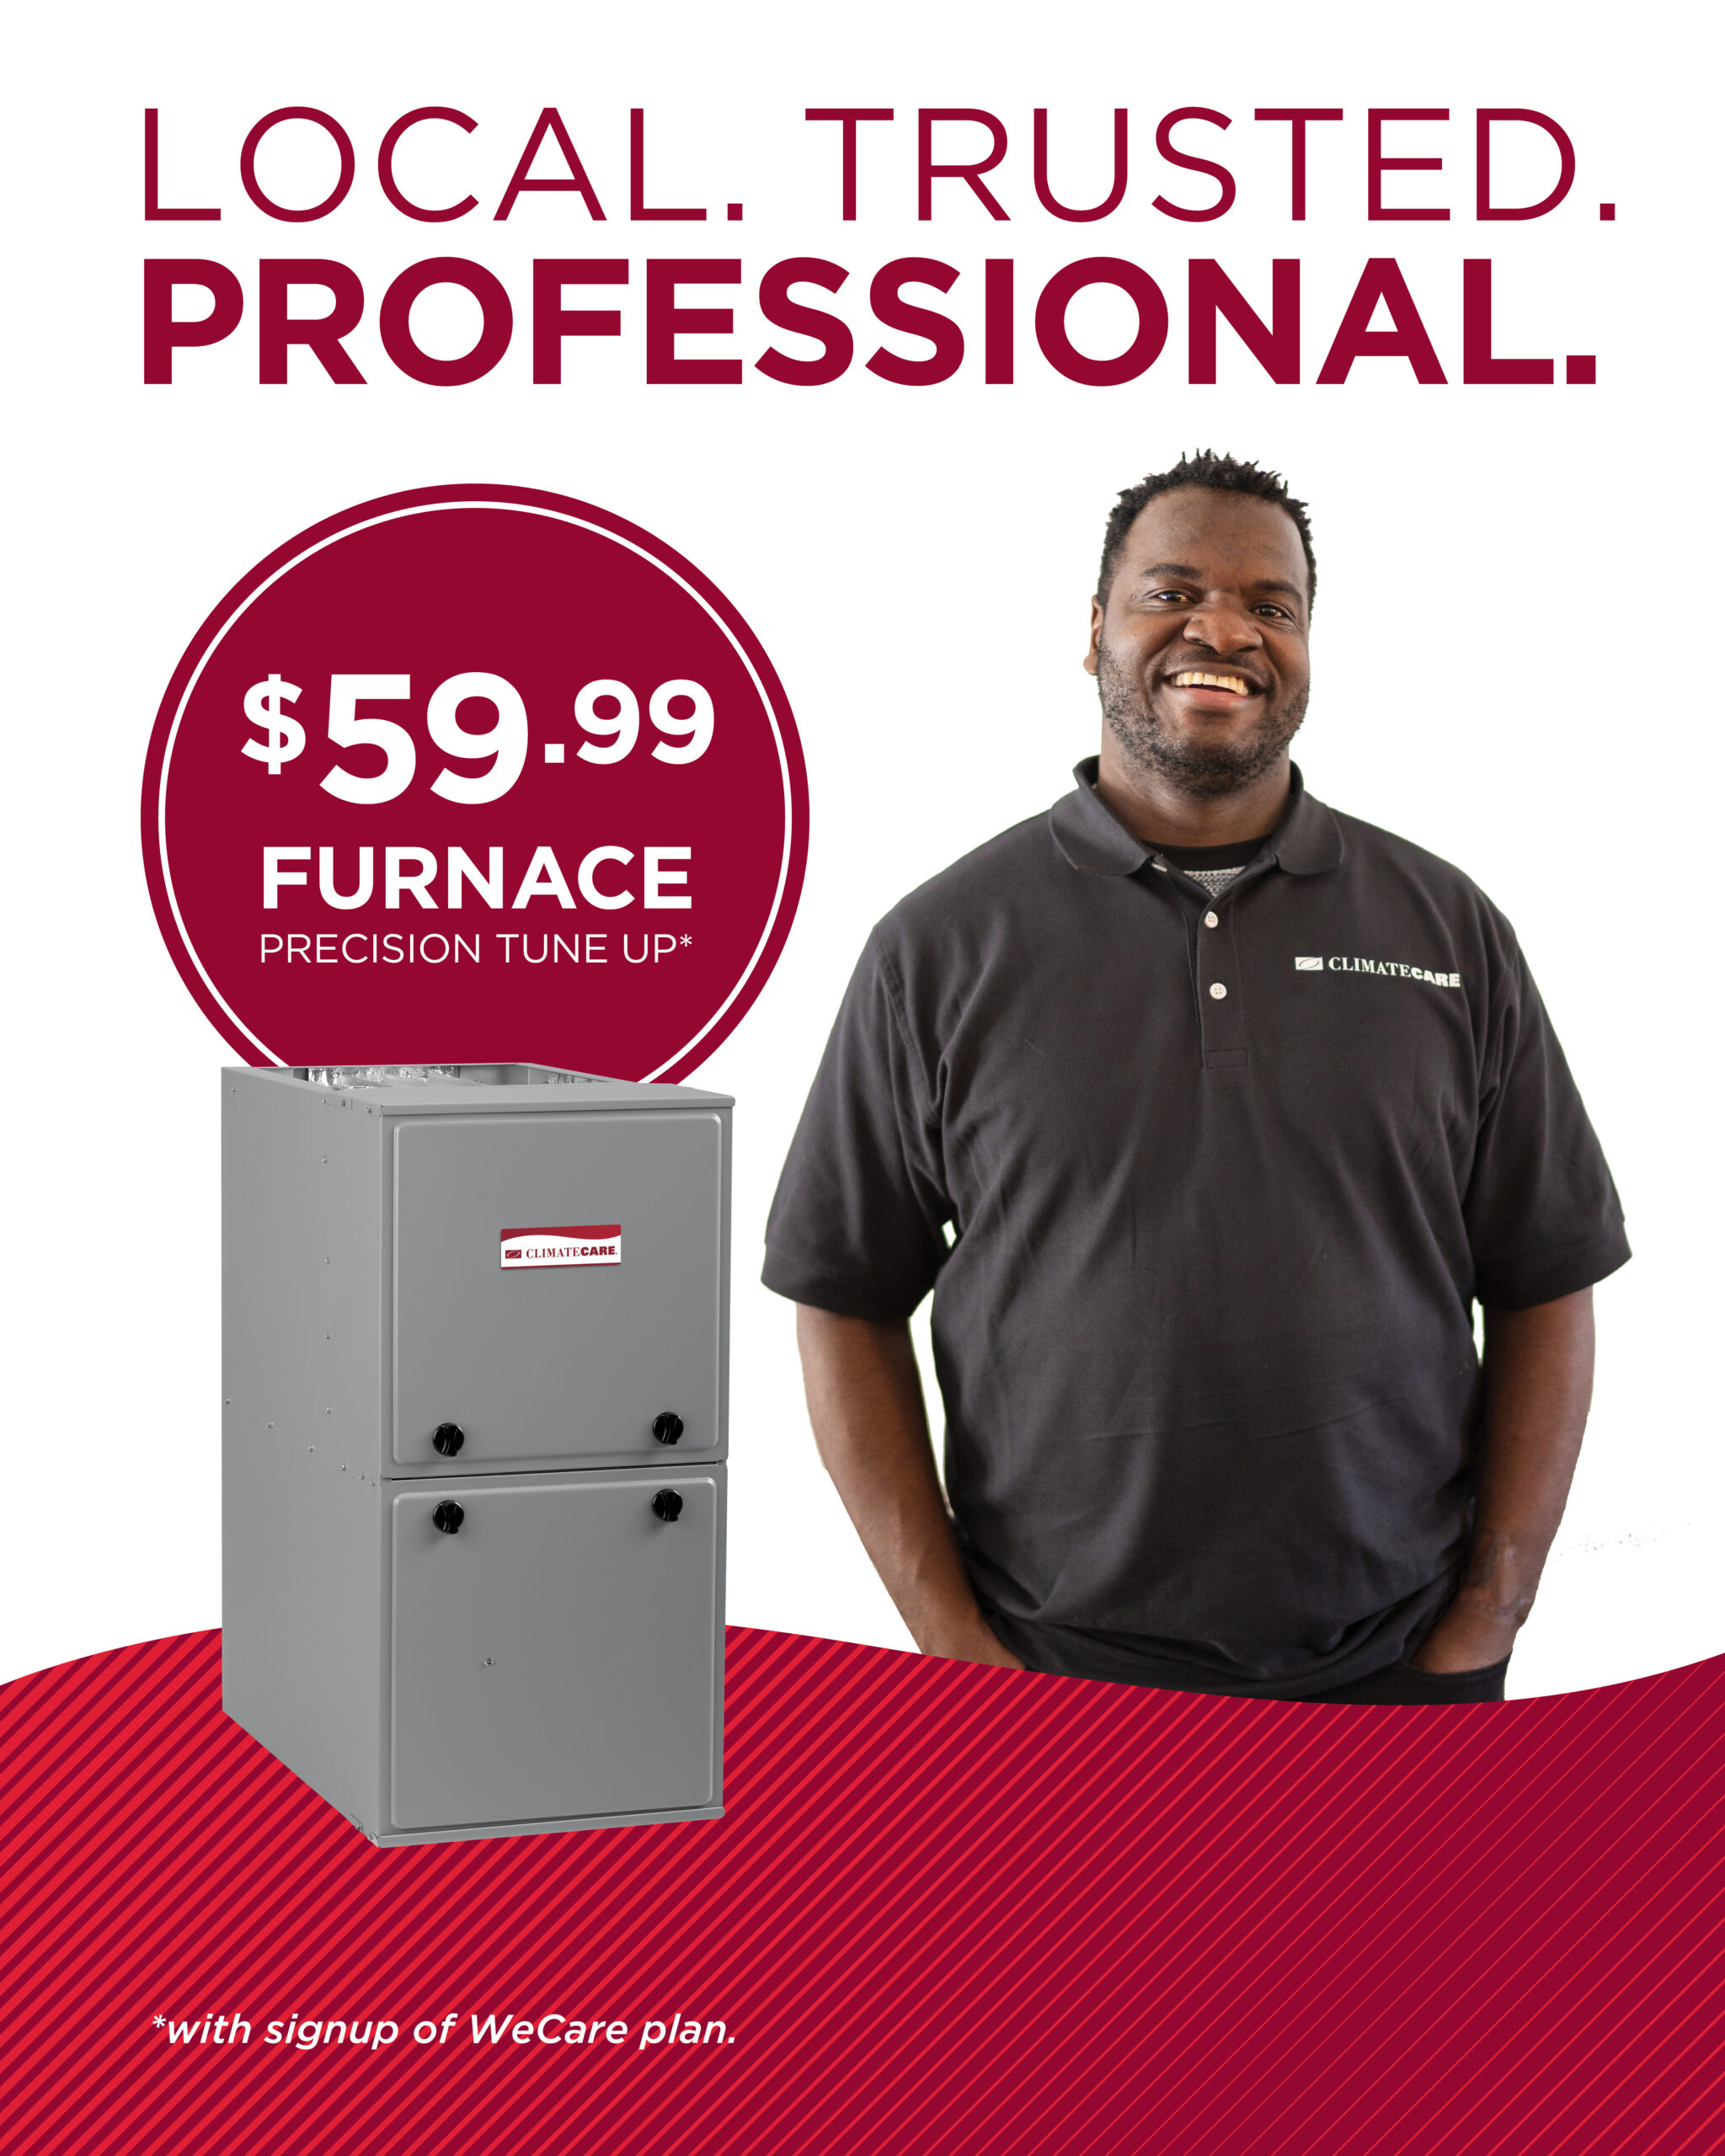 Furnace Tune Up Special - Brockville and area